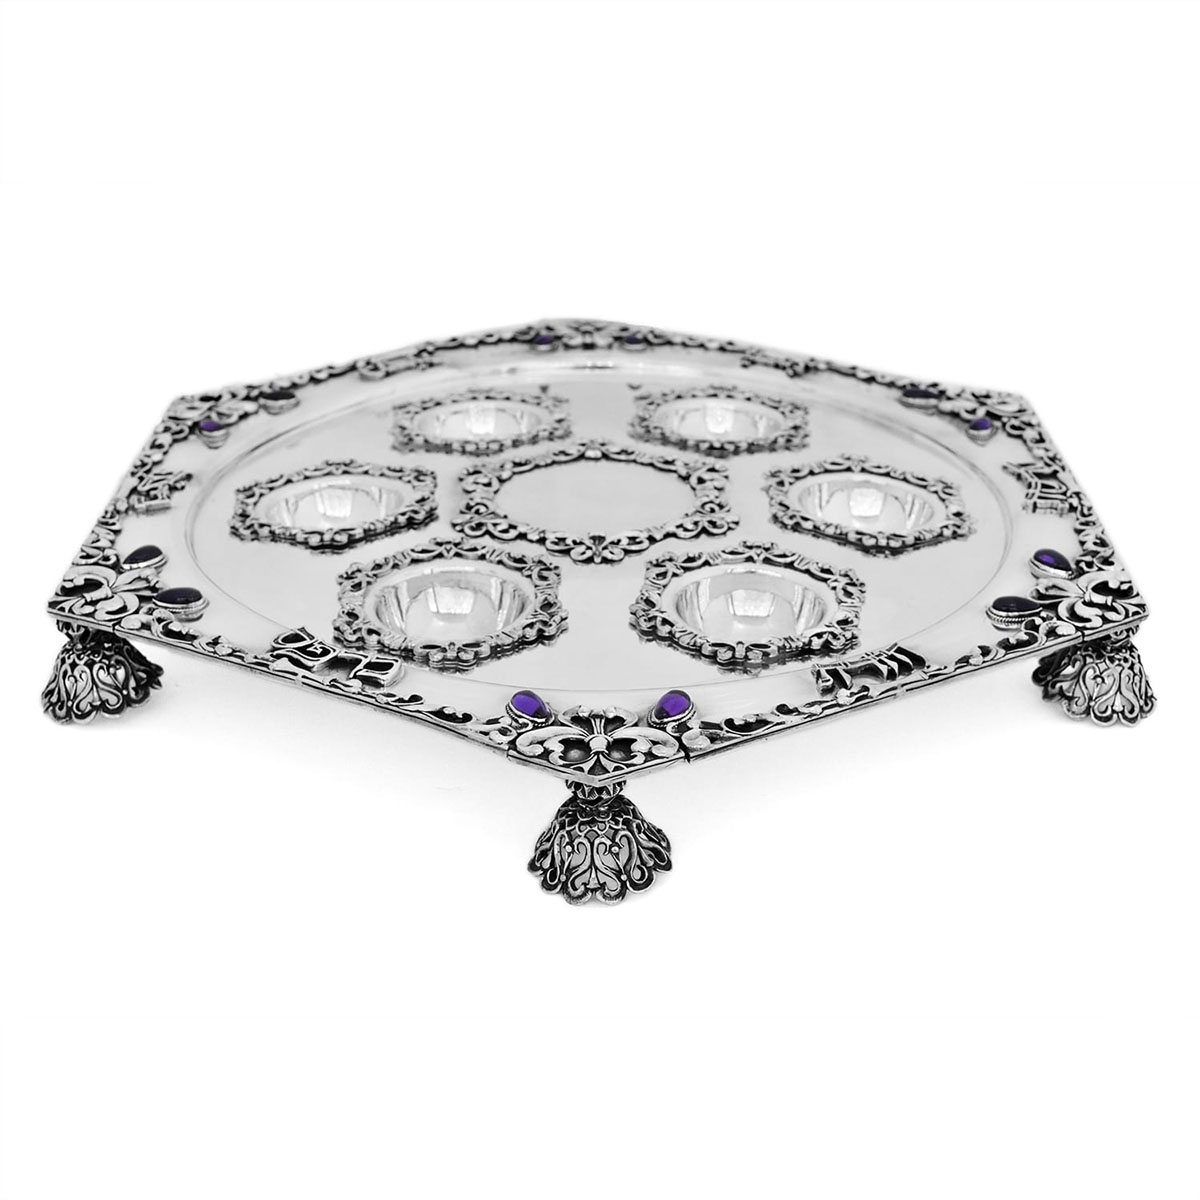 Nadav Art 925 Sterling Silver Seder Plate With Majestic Design and Amethyst Stones - 1